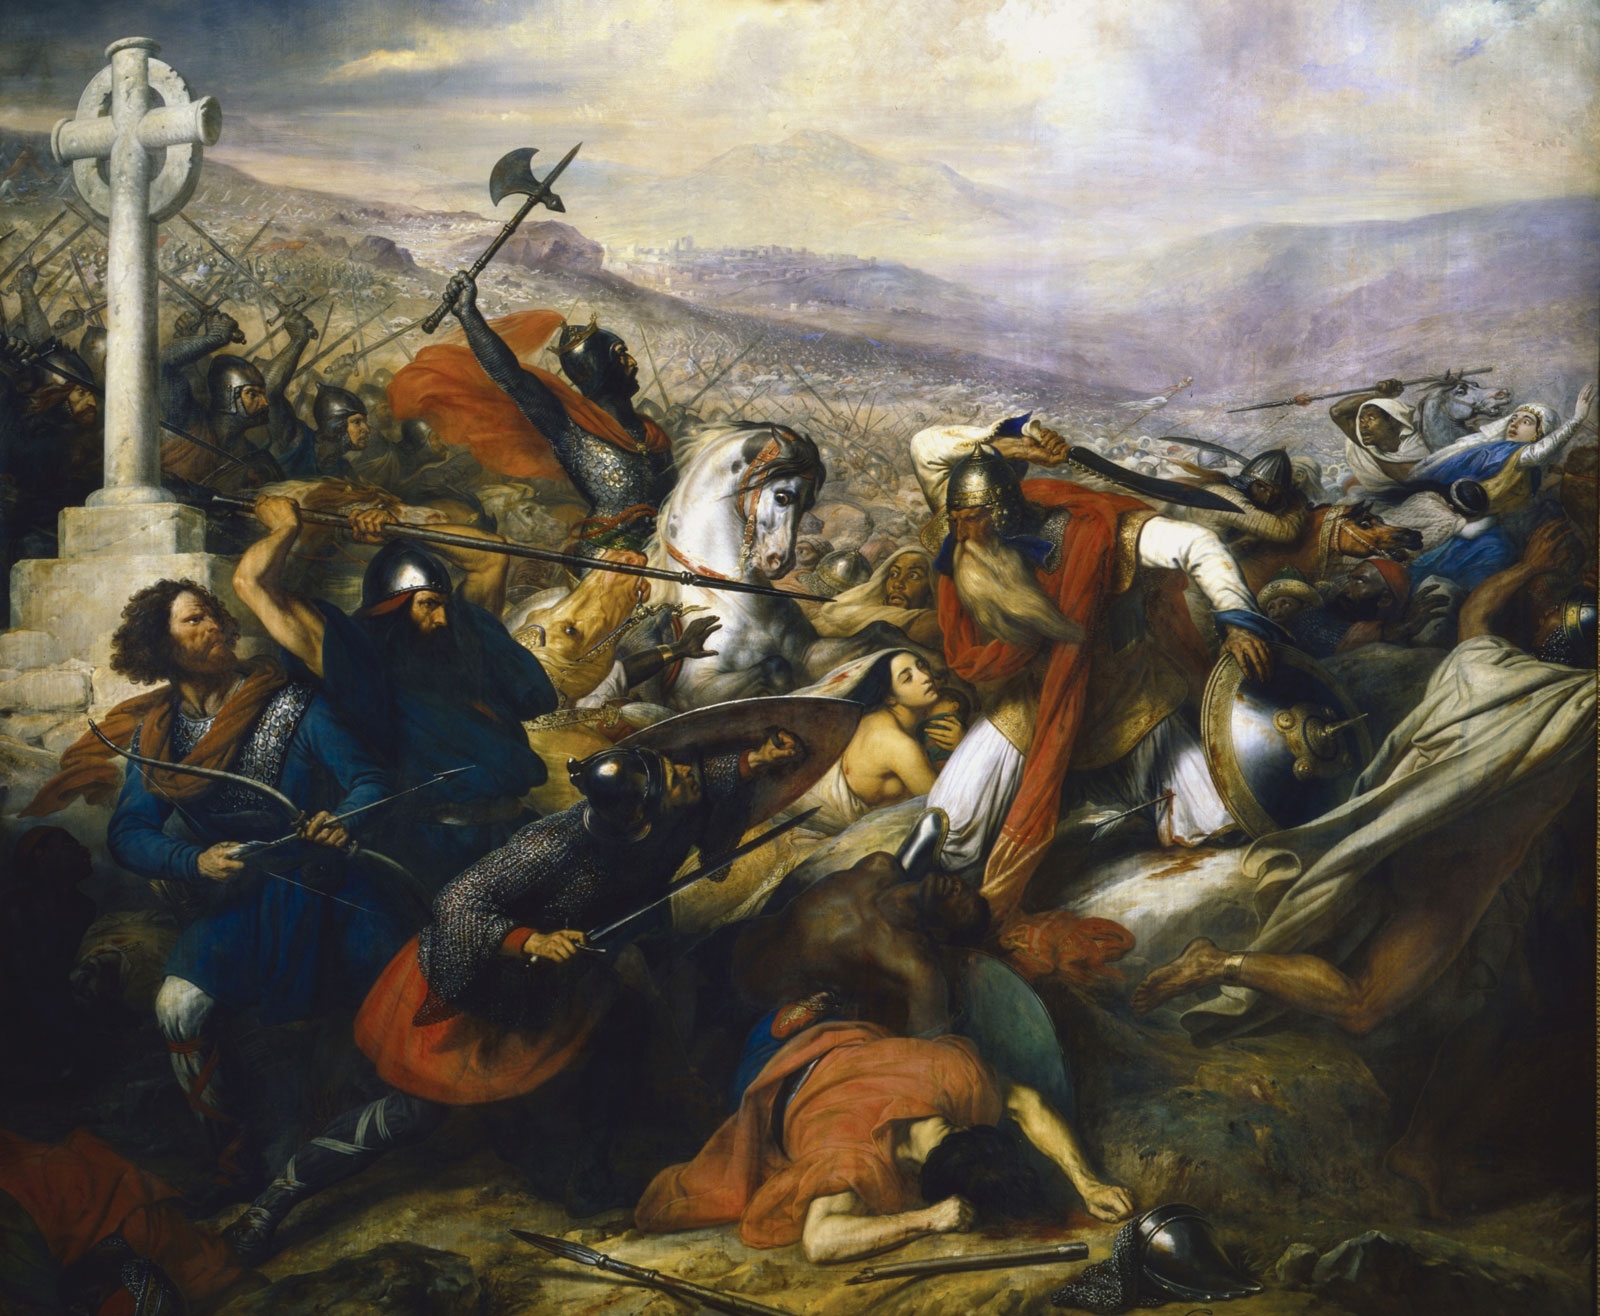 Battle of Tours-732-Charles Martel-Hammer-Umayyad Caliphate-Holger the Dane-Poitiers-Charlemagne-Reconquista-2